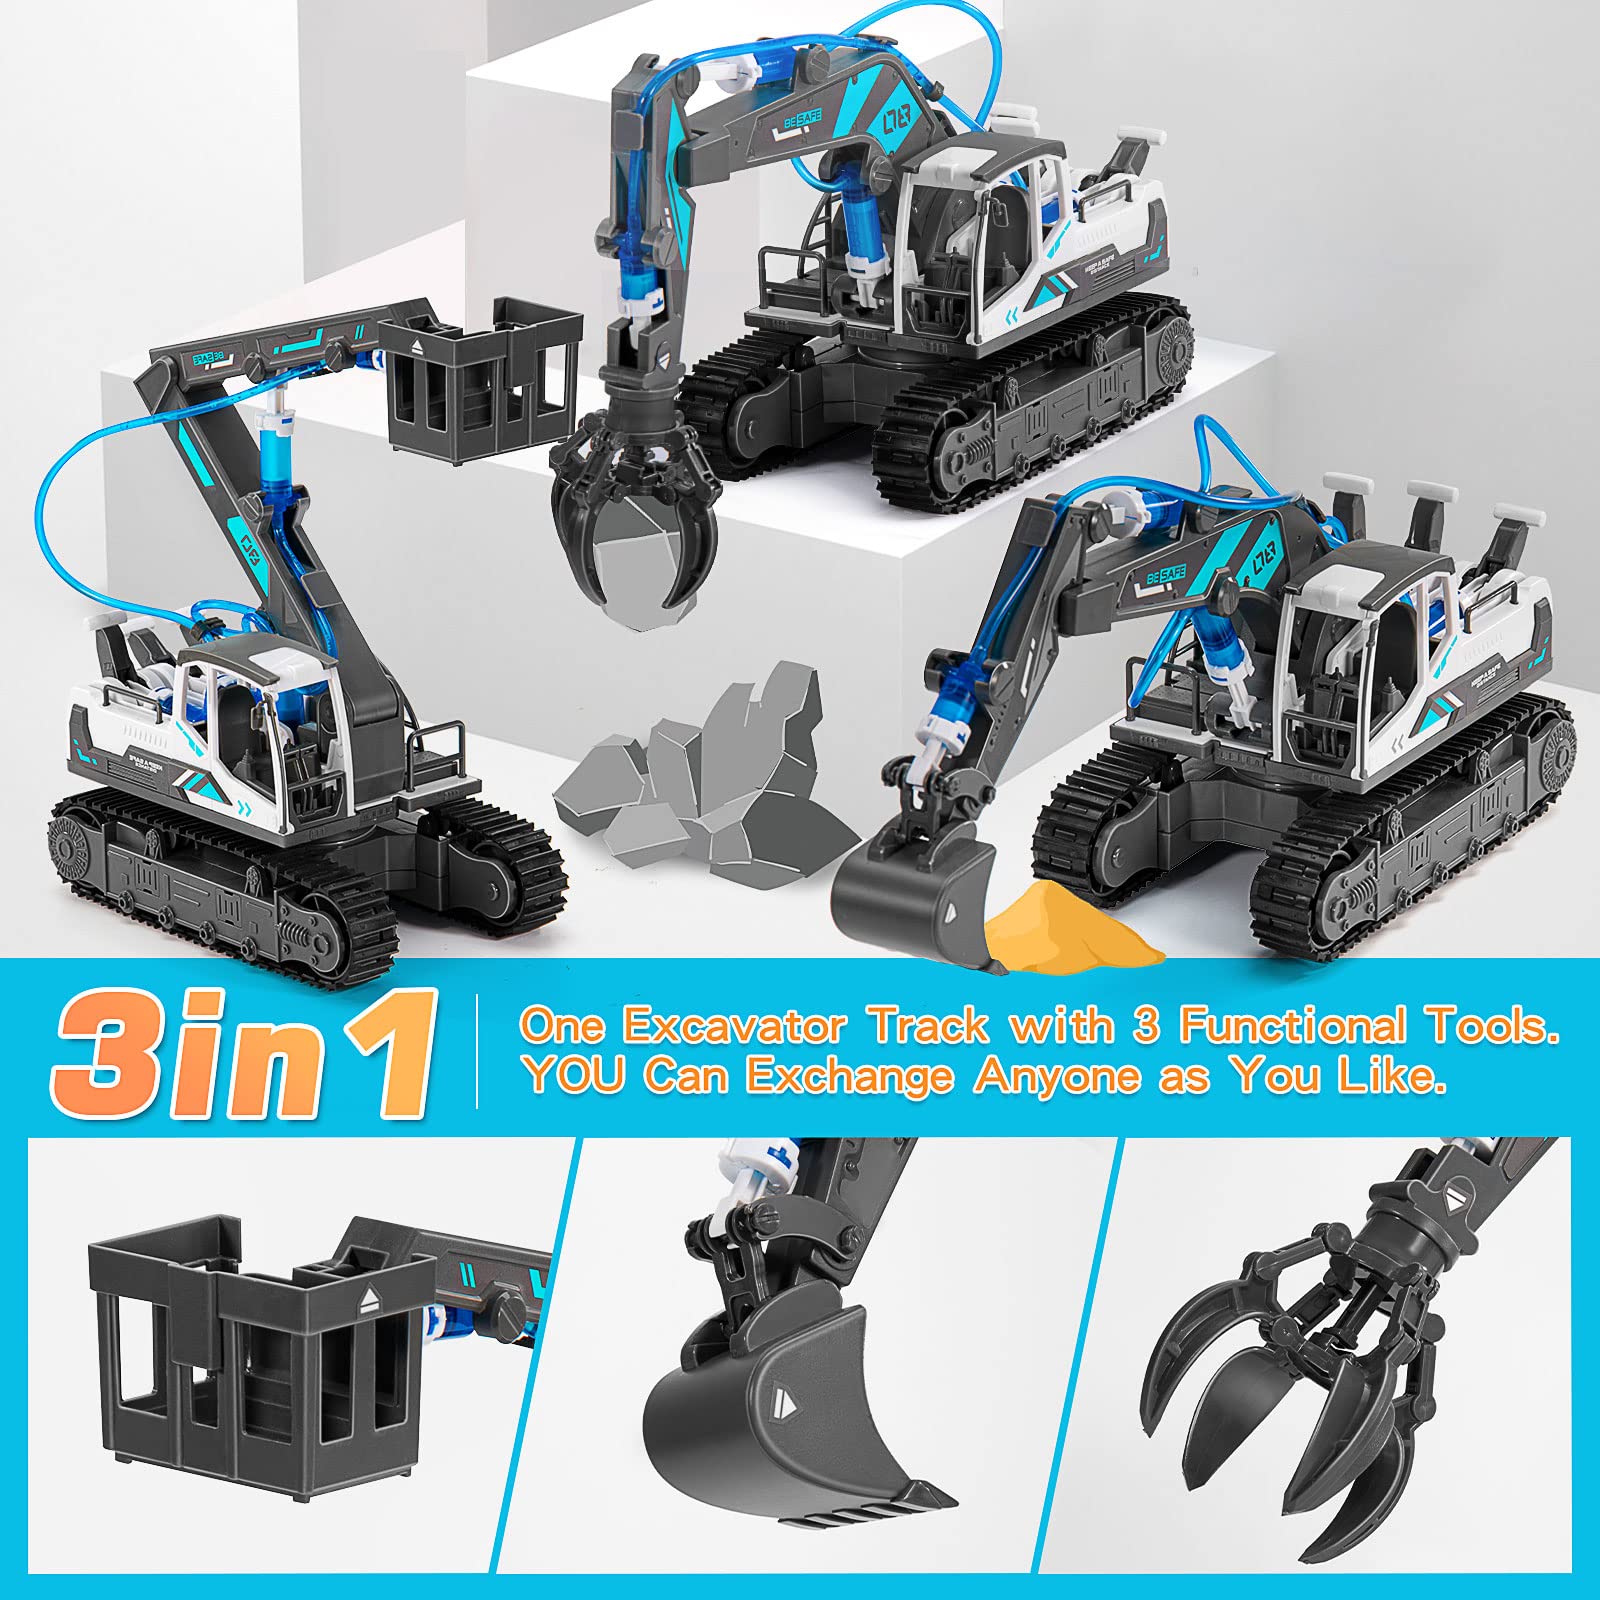 VANLINNY Robot Kits,RC Arm and Remote Control Excavator,2-in Science Kits - 3